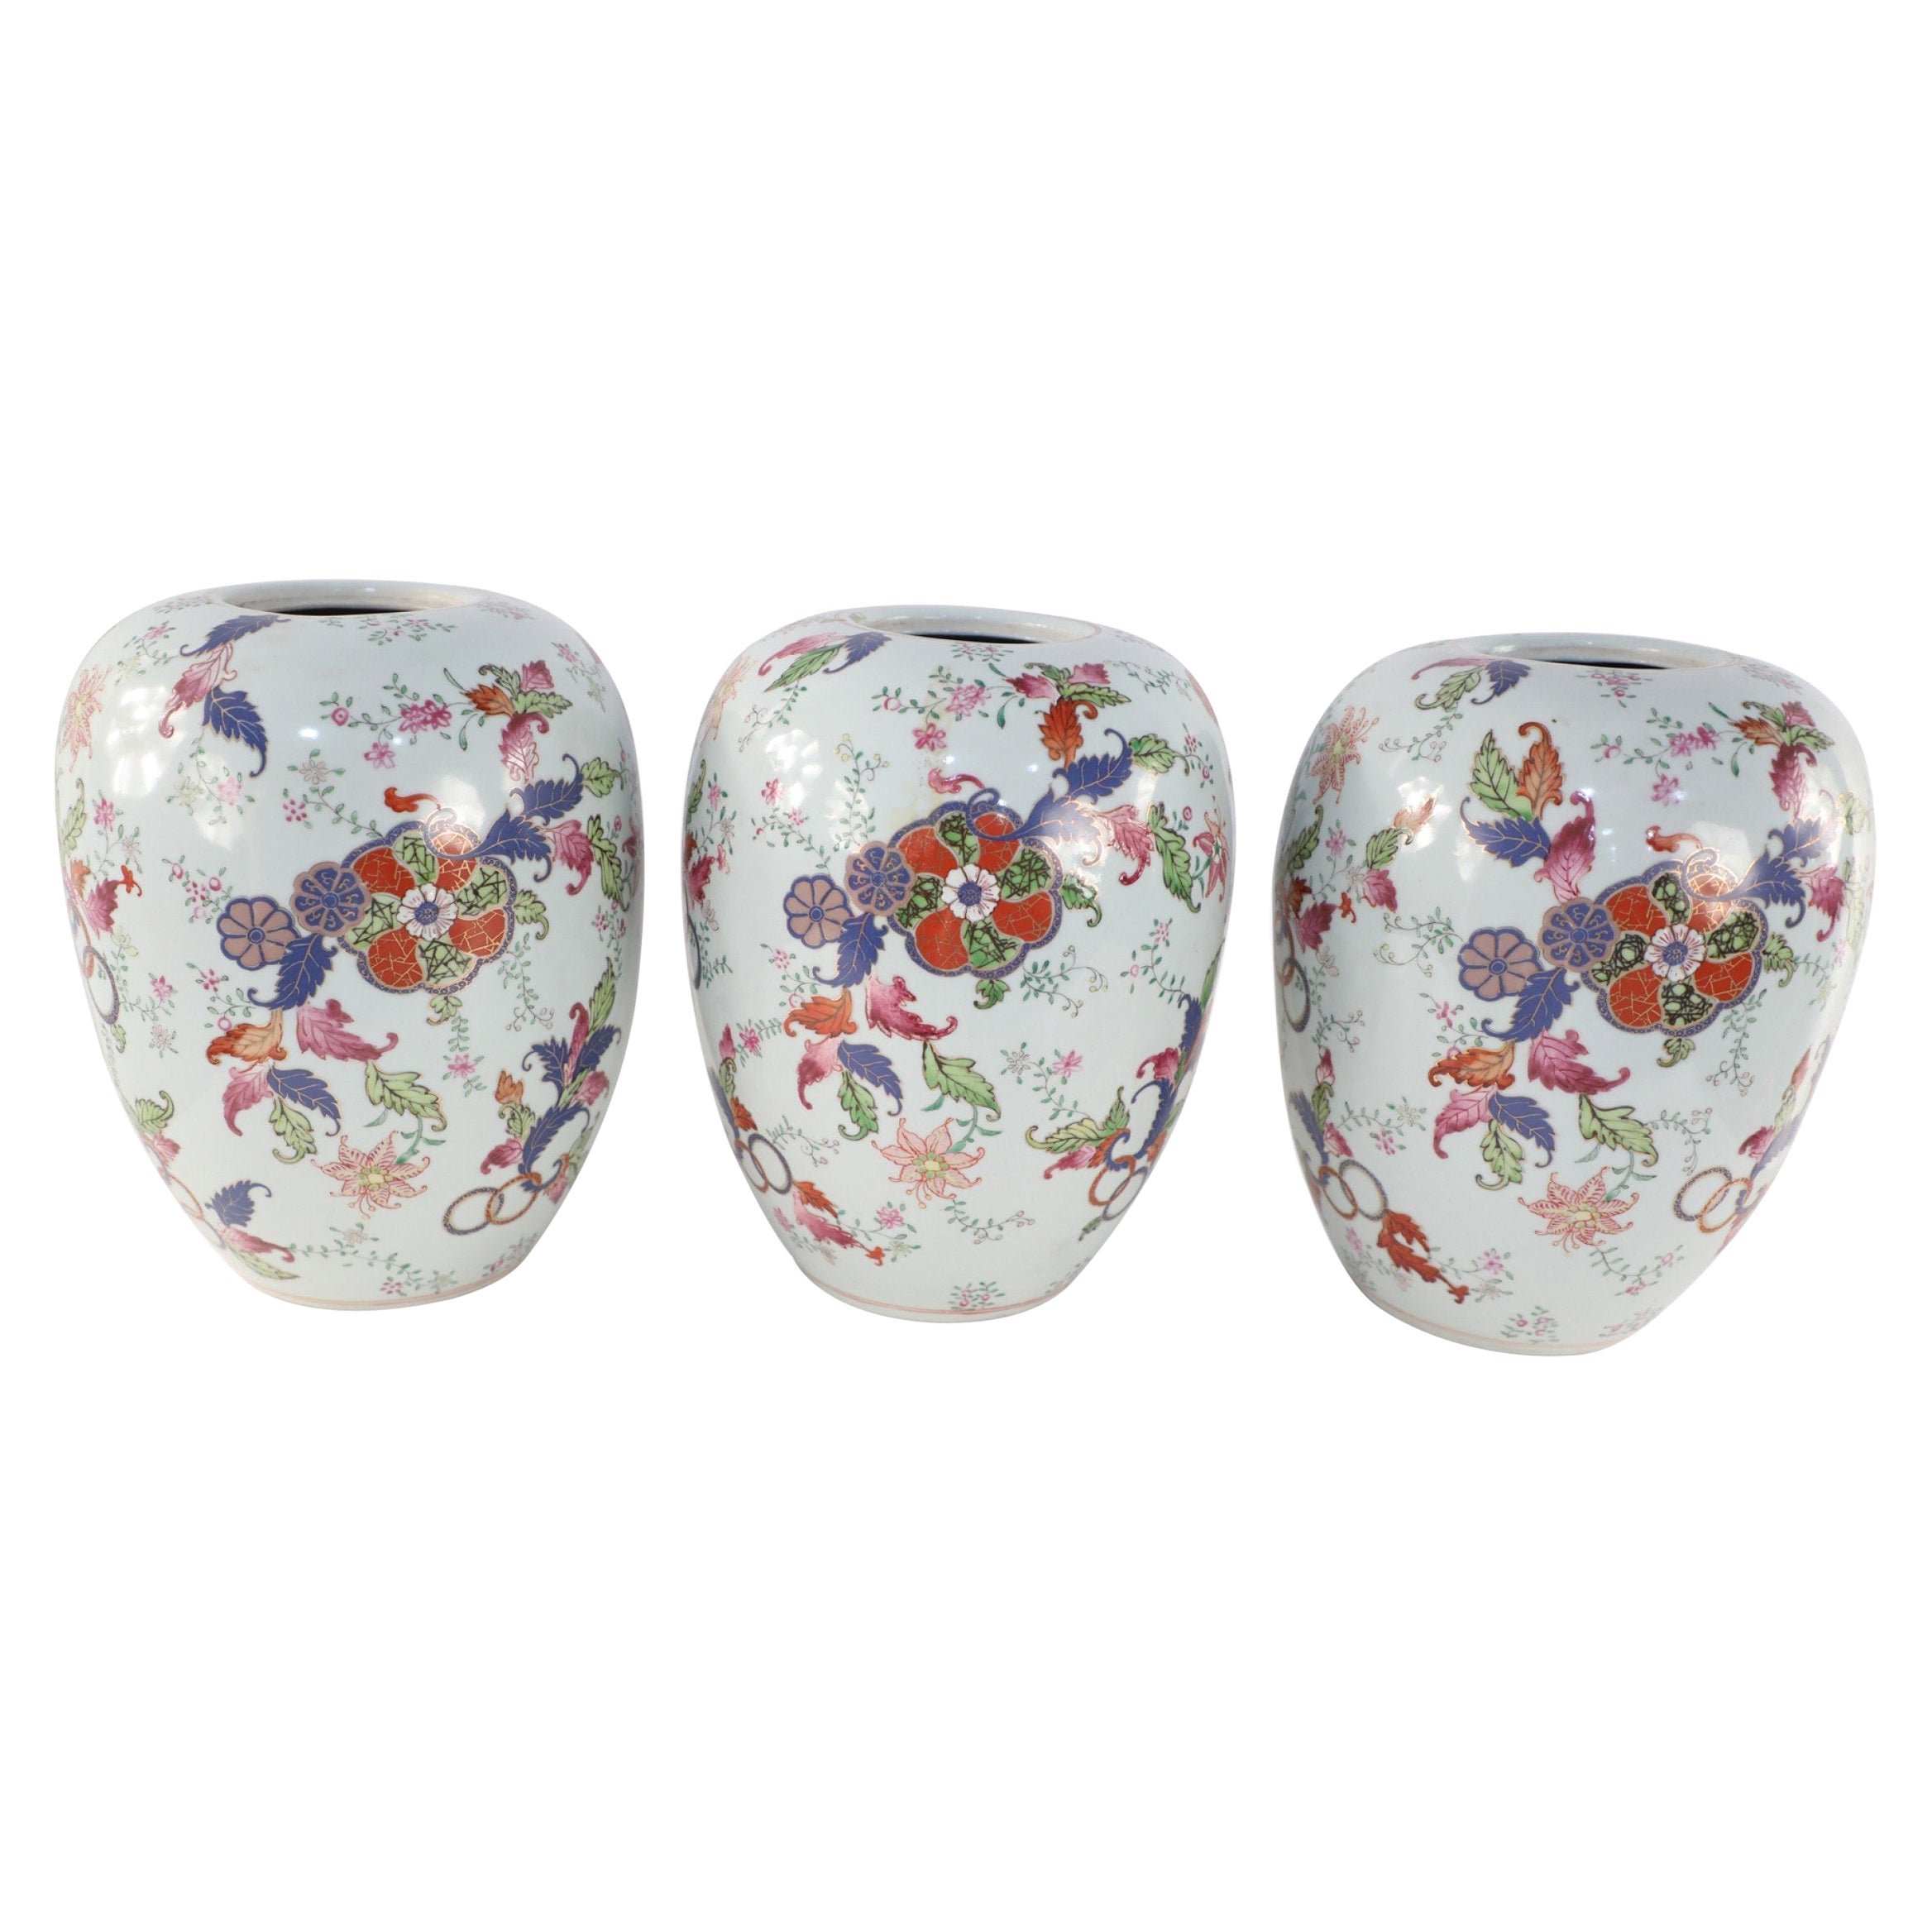 Chinese White and Floral Pattern Porcelain Jars For Sale